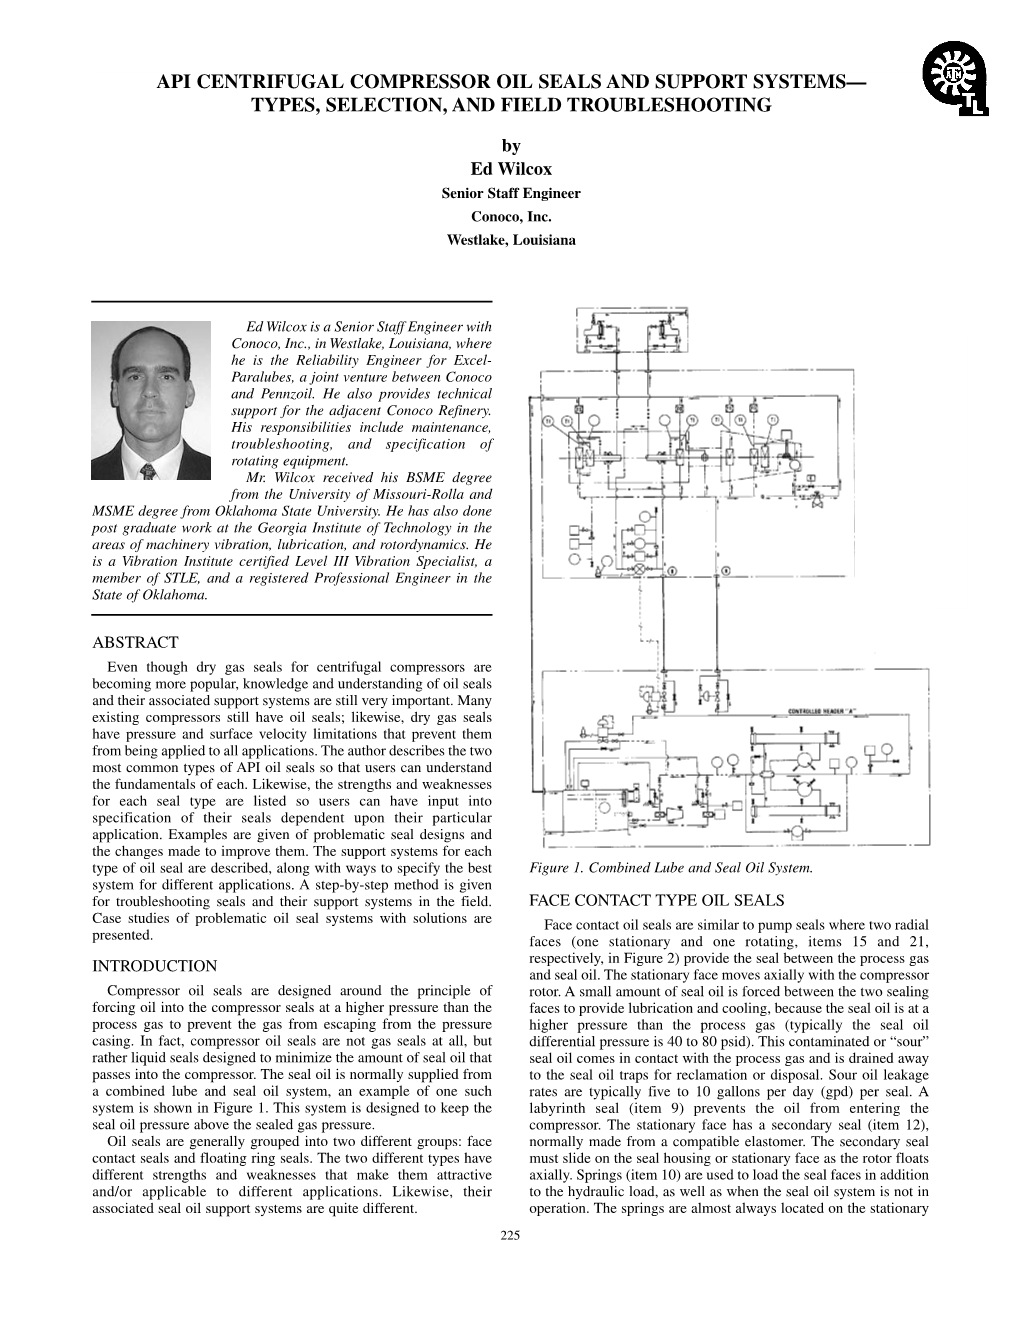 Api Centrifugal Compressor Oil Seals and Support Systems— Types, Selection, and Field Troubleshooting